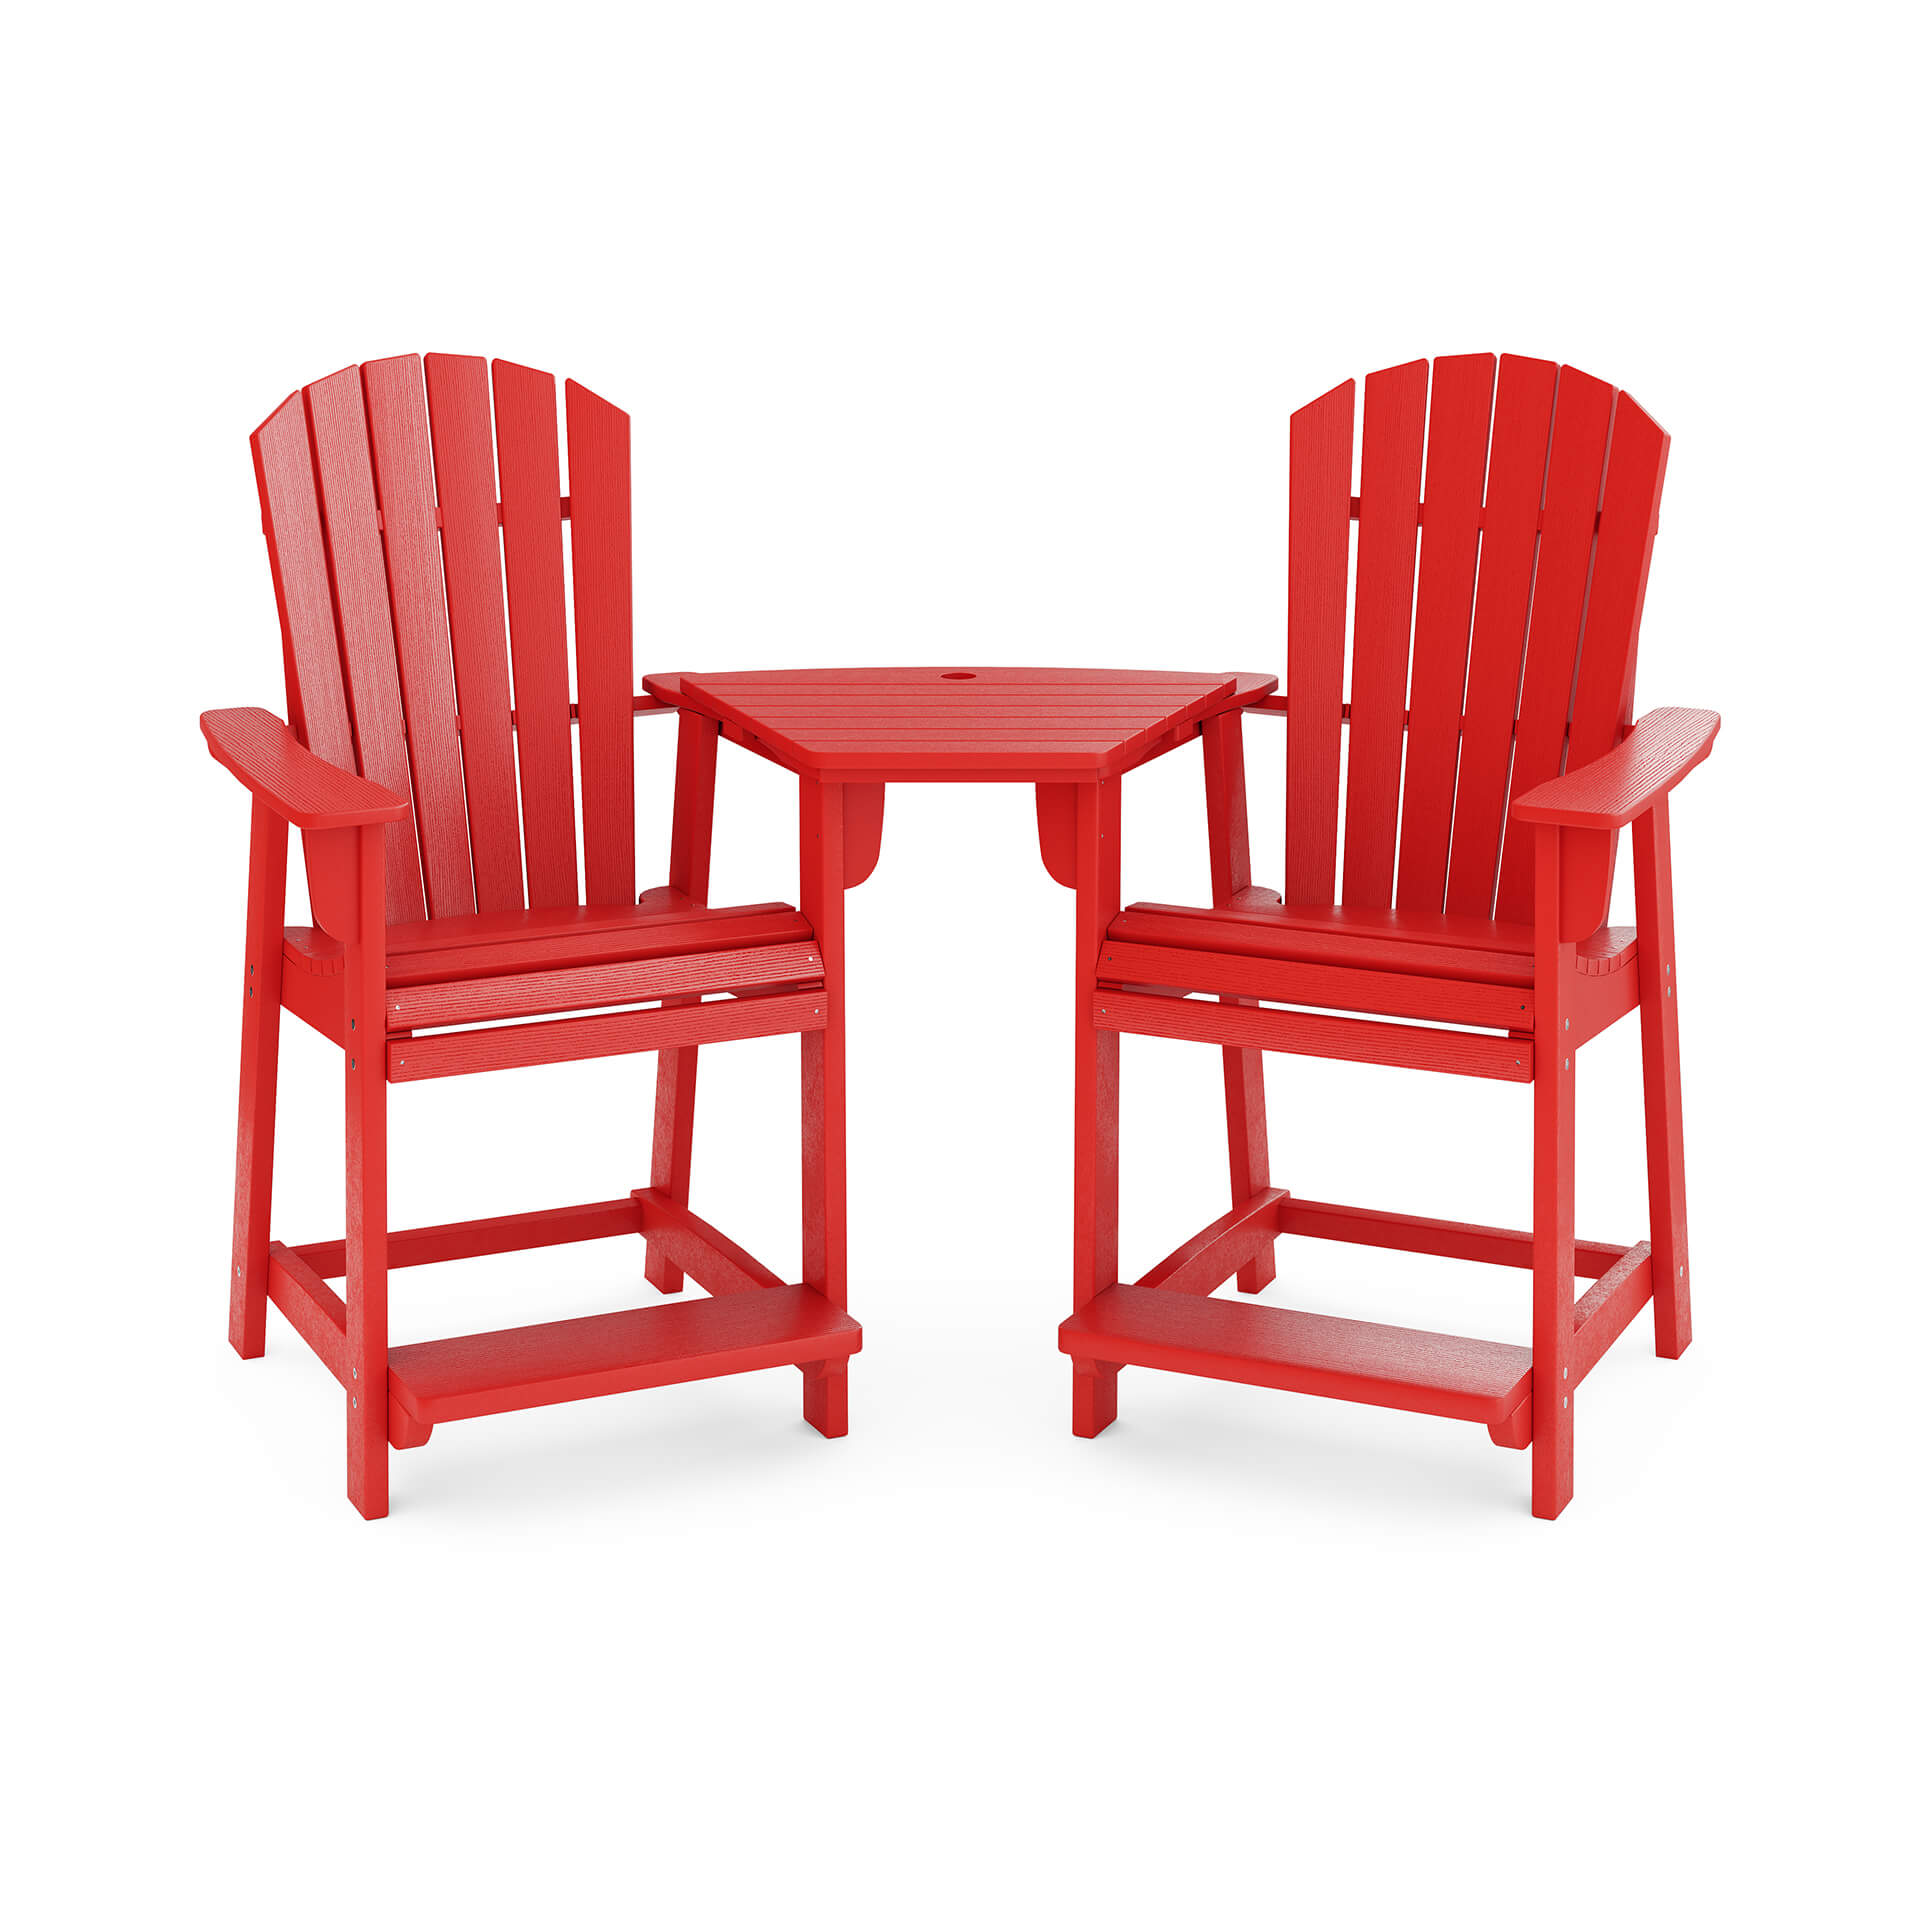 Silo 3D Render of Red Chairs